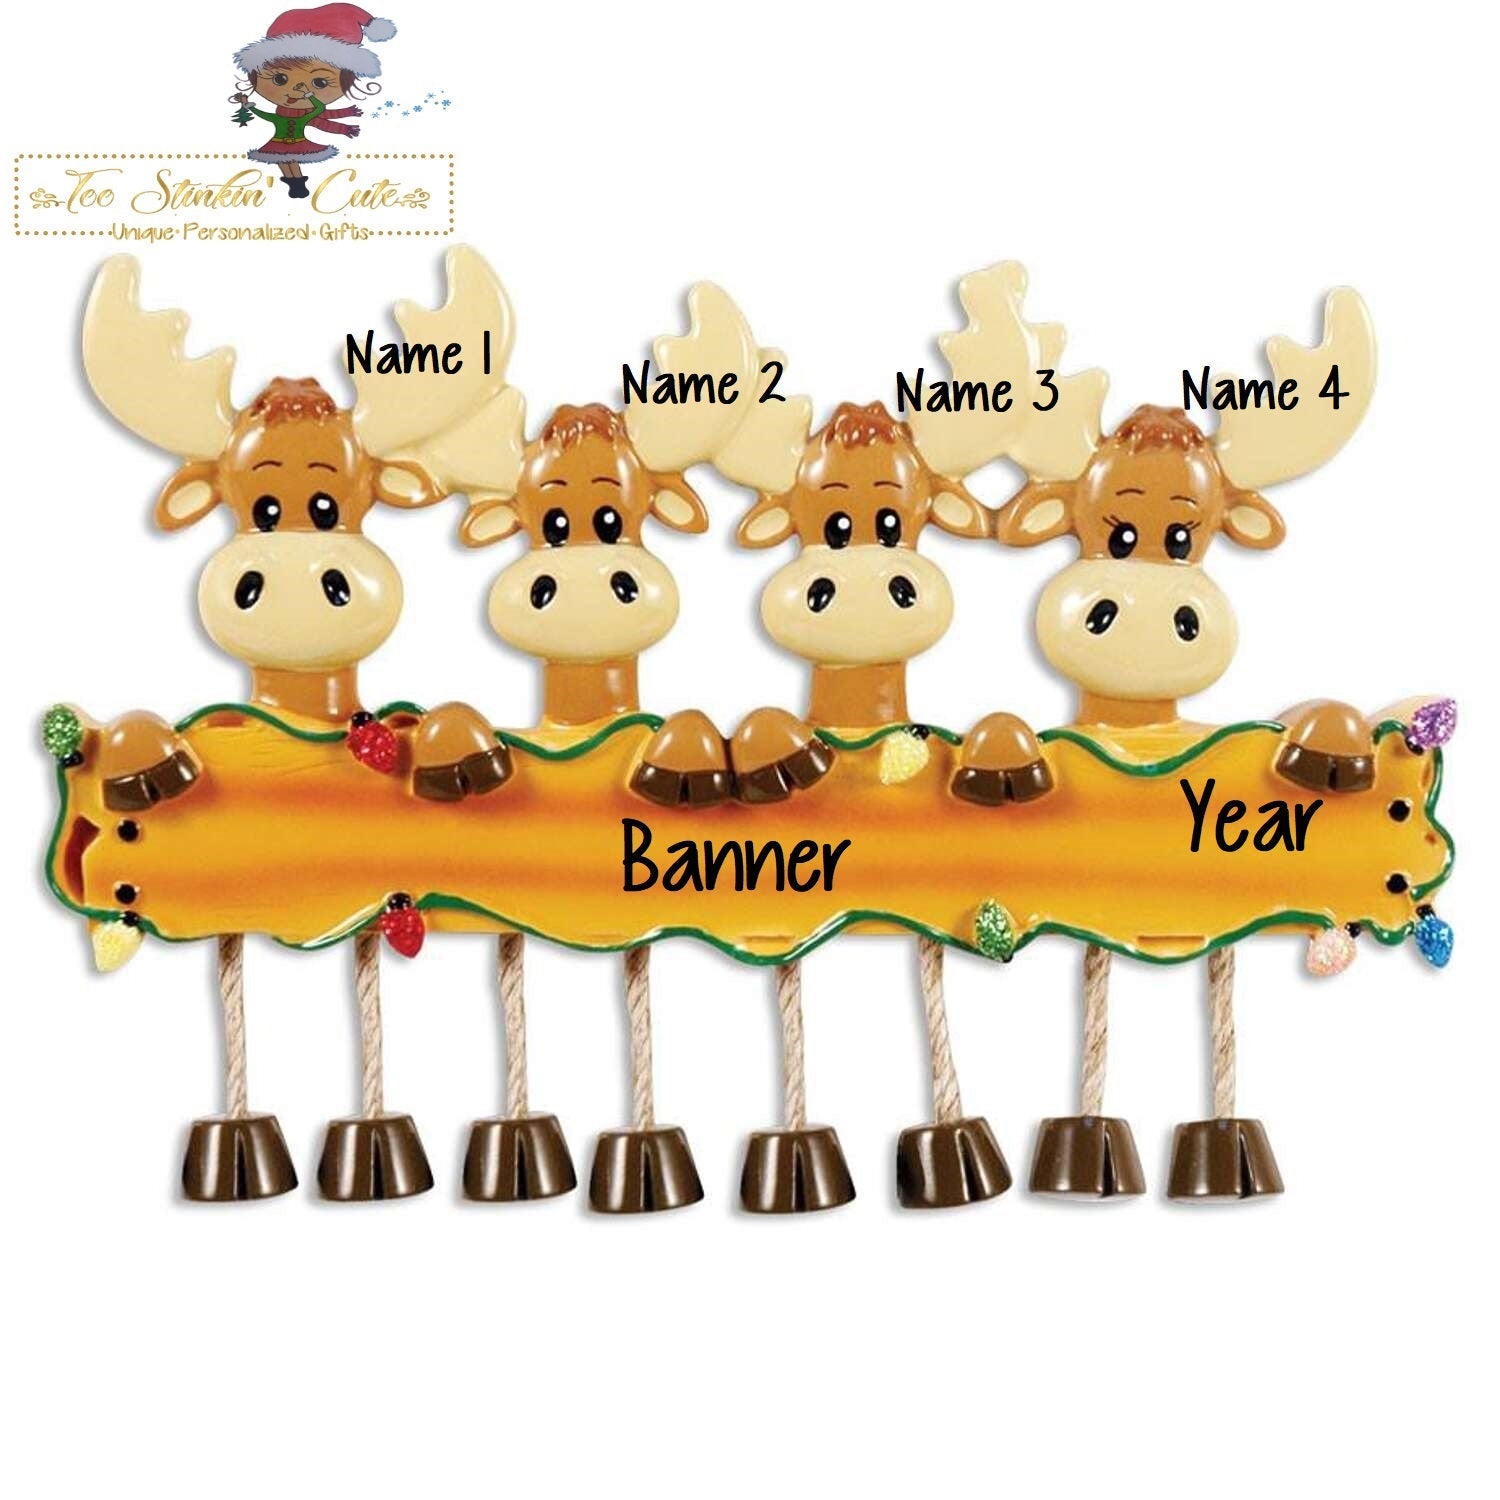 Christmas Ornament Moose Family of 4/ Friends/ Coworkers - Personalized + Free Shipping! Reindeer